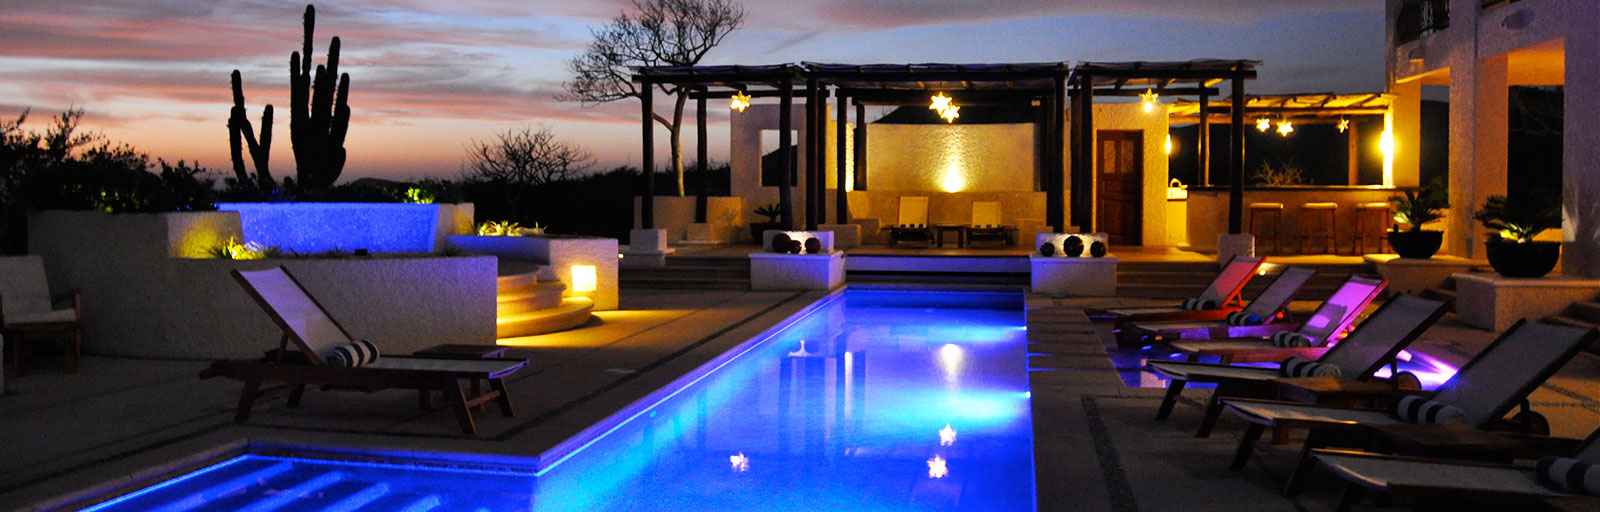 Spa & Yoga Retreat in Mexico: Swimming Pool Lit at Night